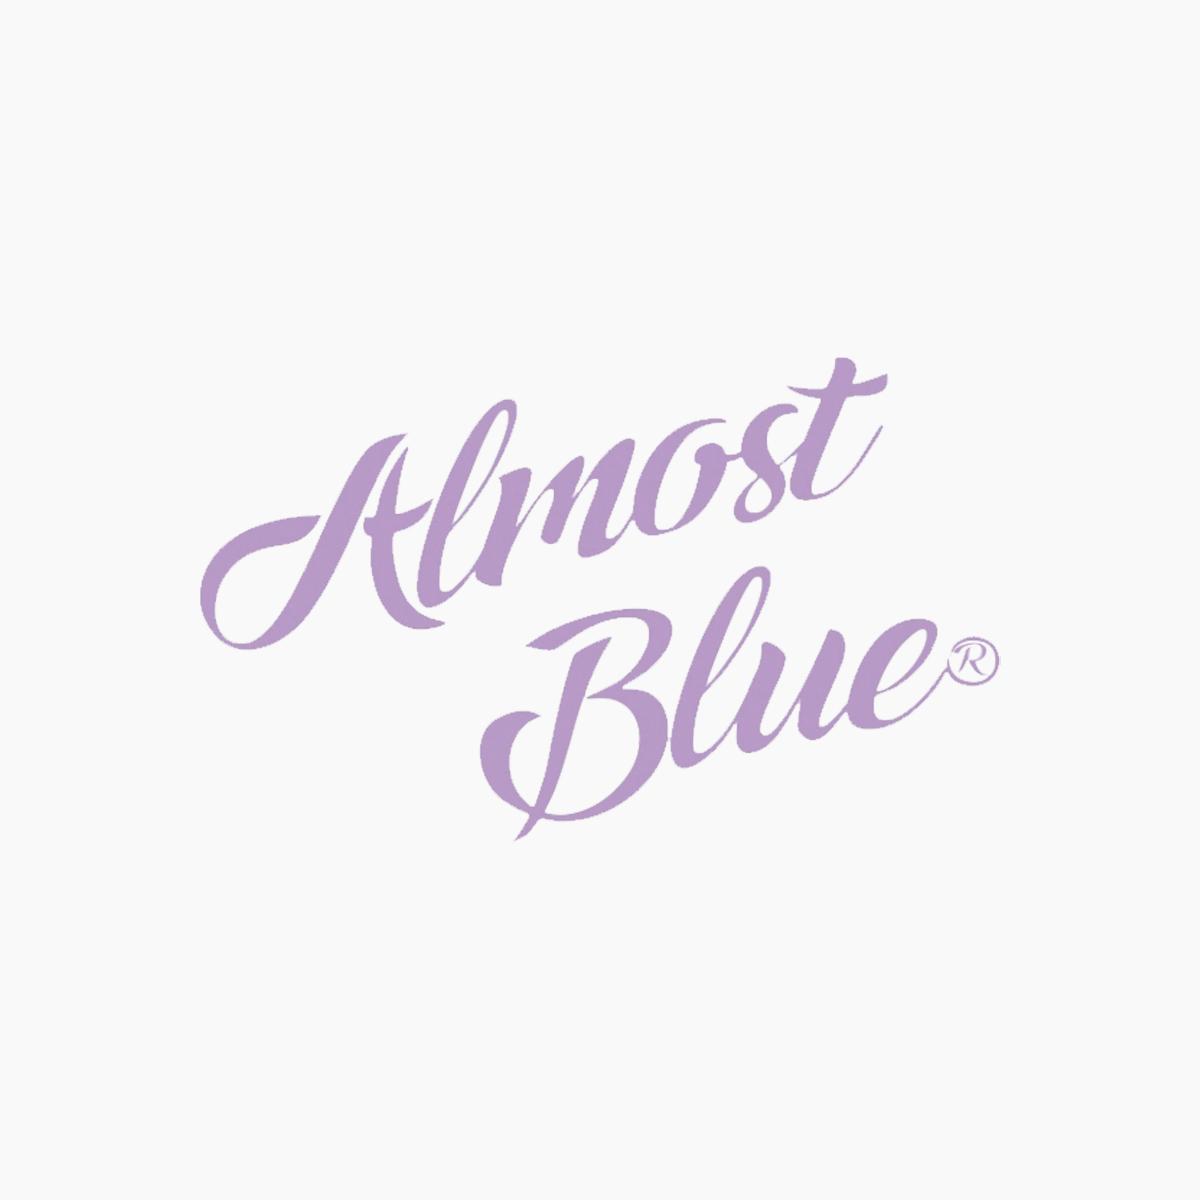 Almost Blue